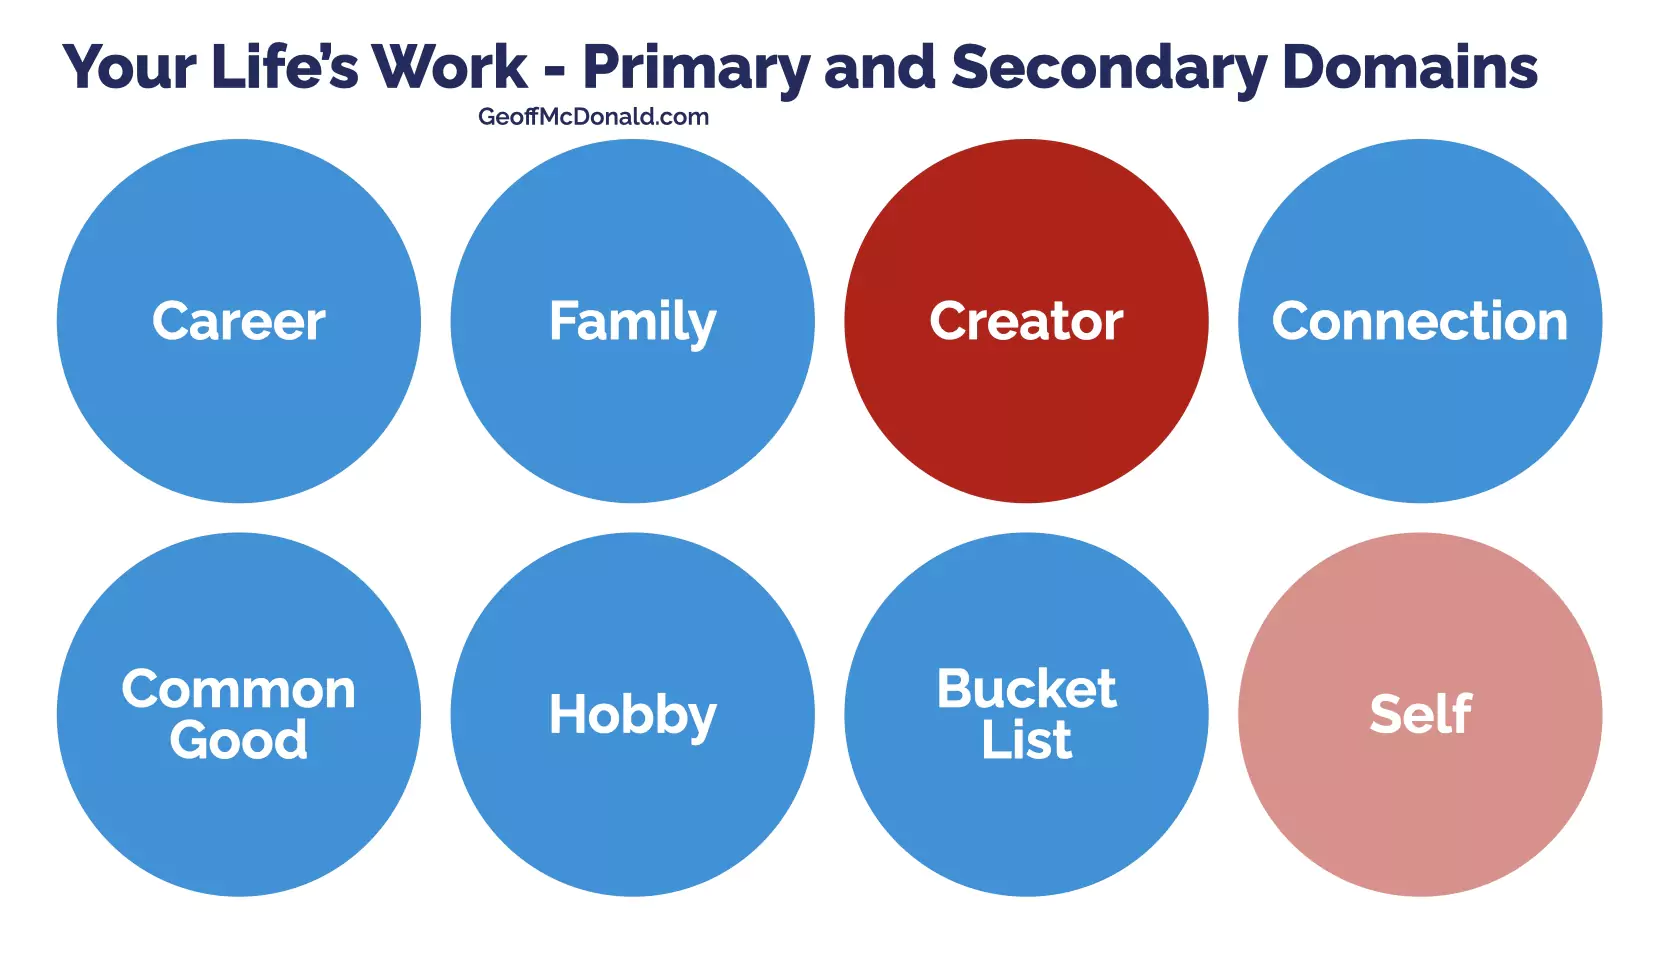 Life's Work - Primary and Secondary Domains